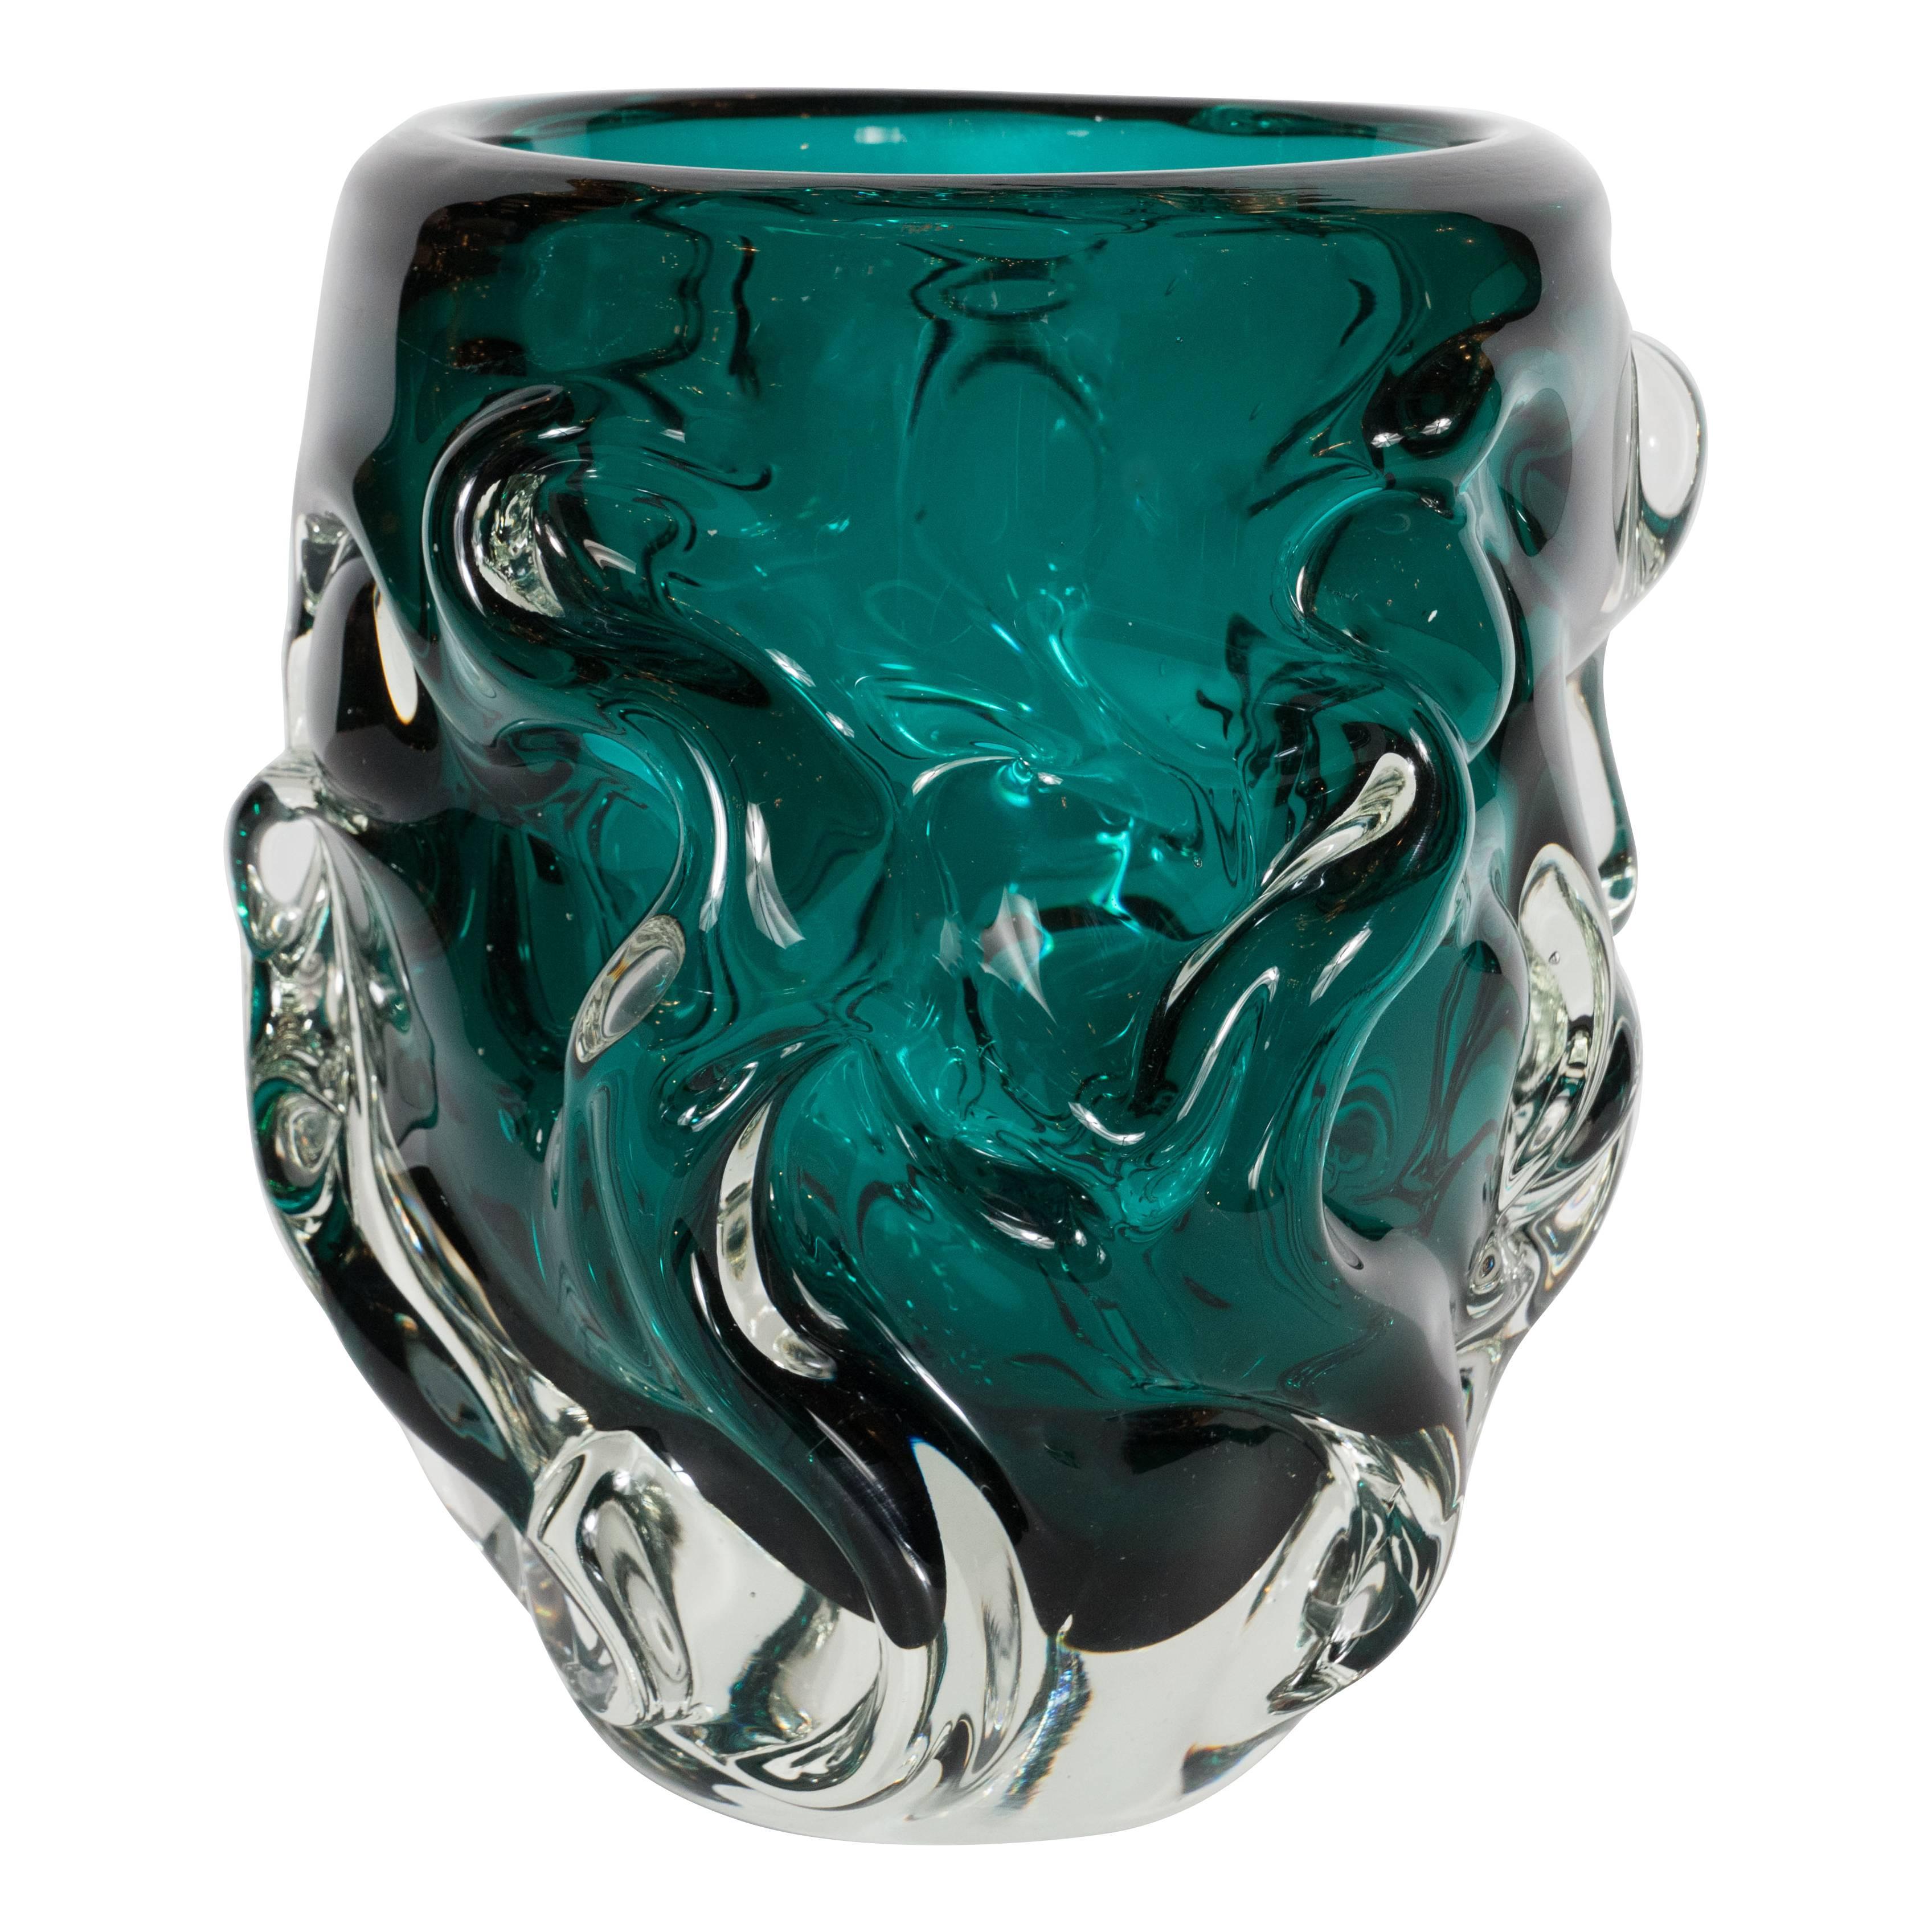 Handblown Sculptural Murano Vase with in Translucent and Teal Glass